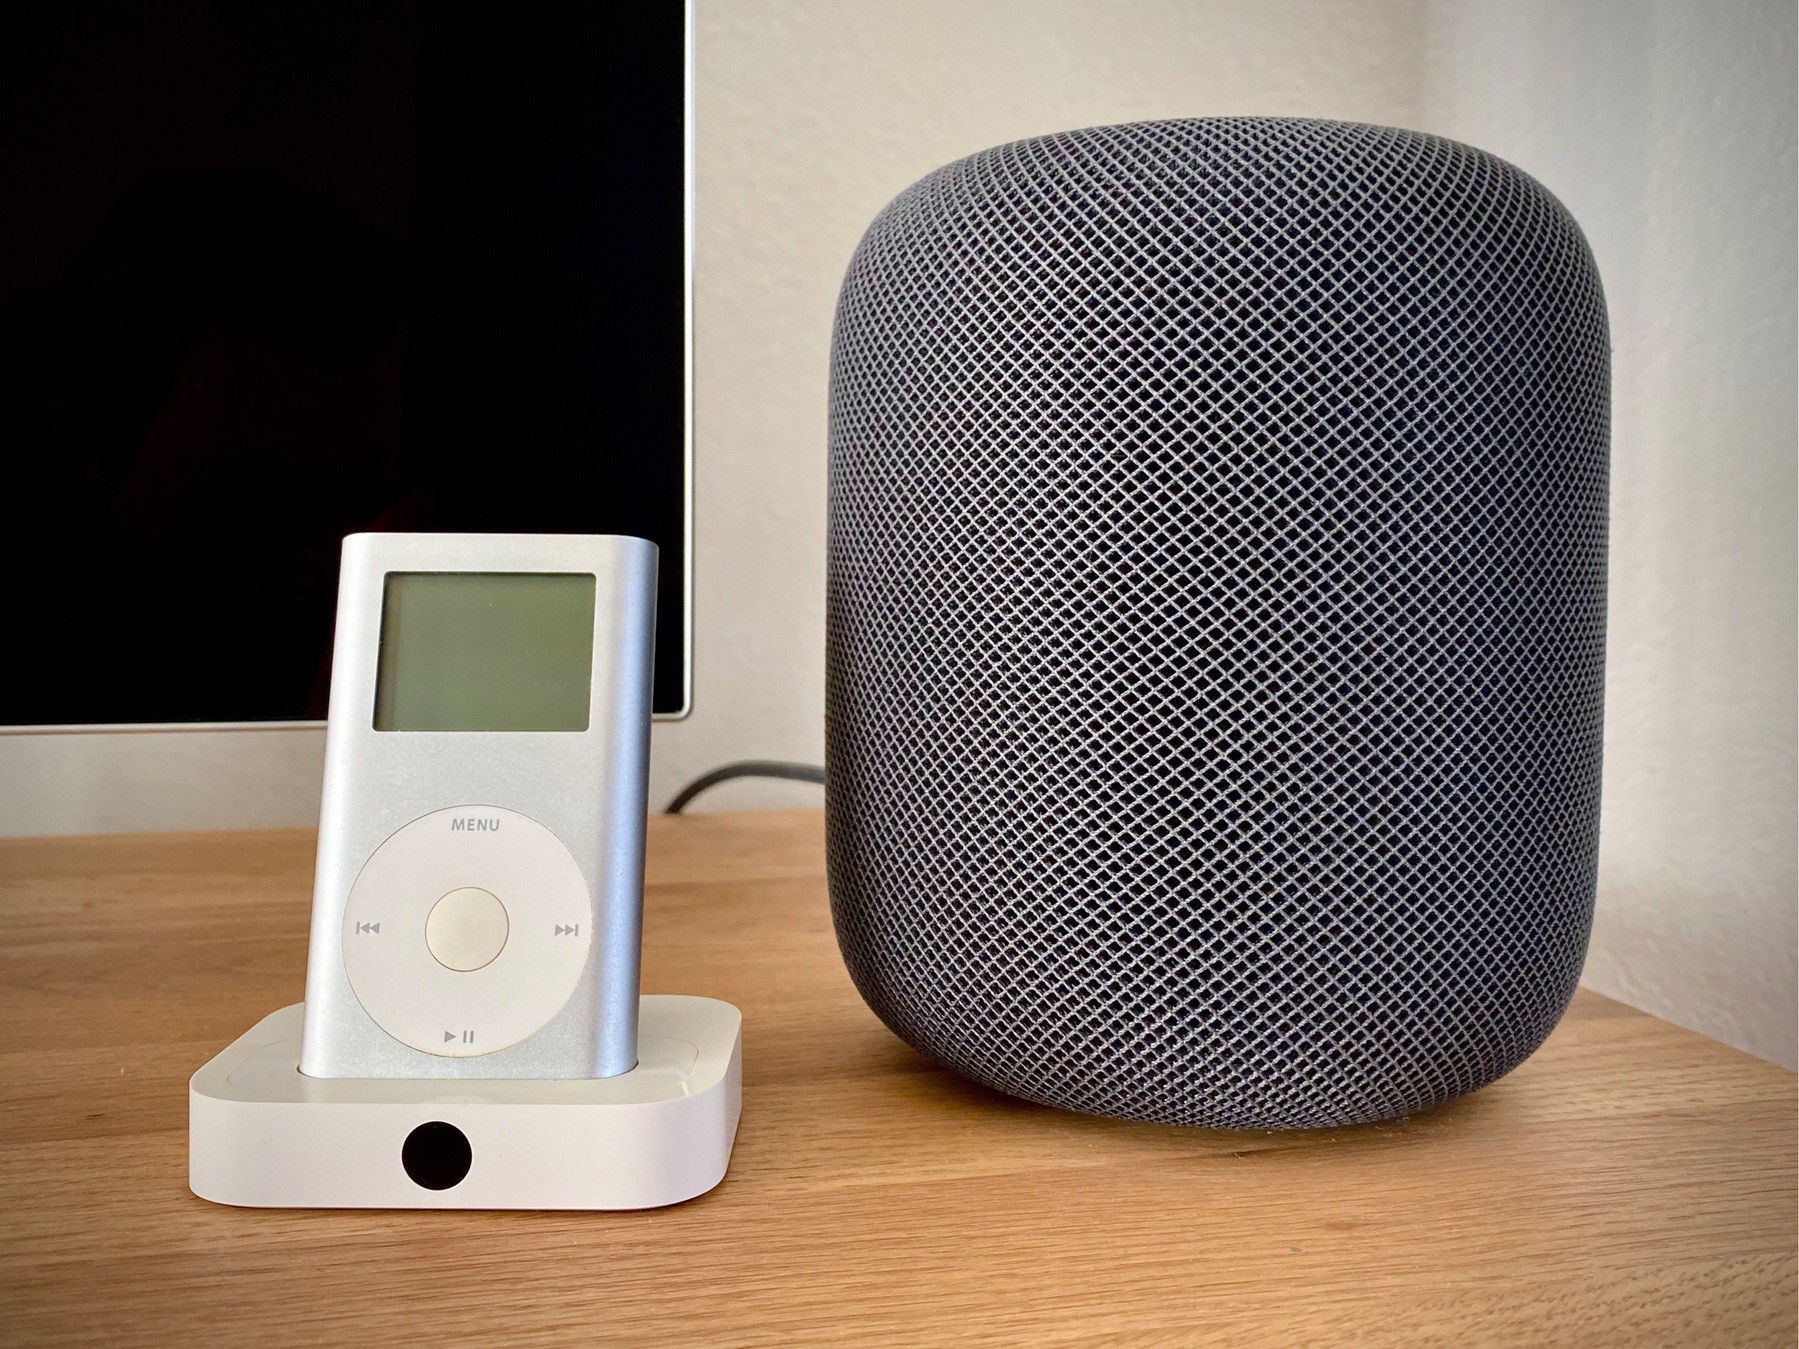 A silver iPod mini in an Apple Universal Dock sits next to a HomePod in space grey.